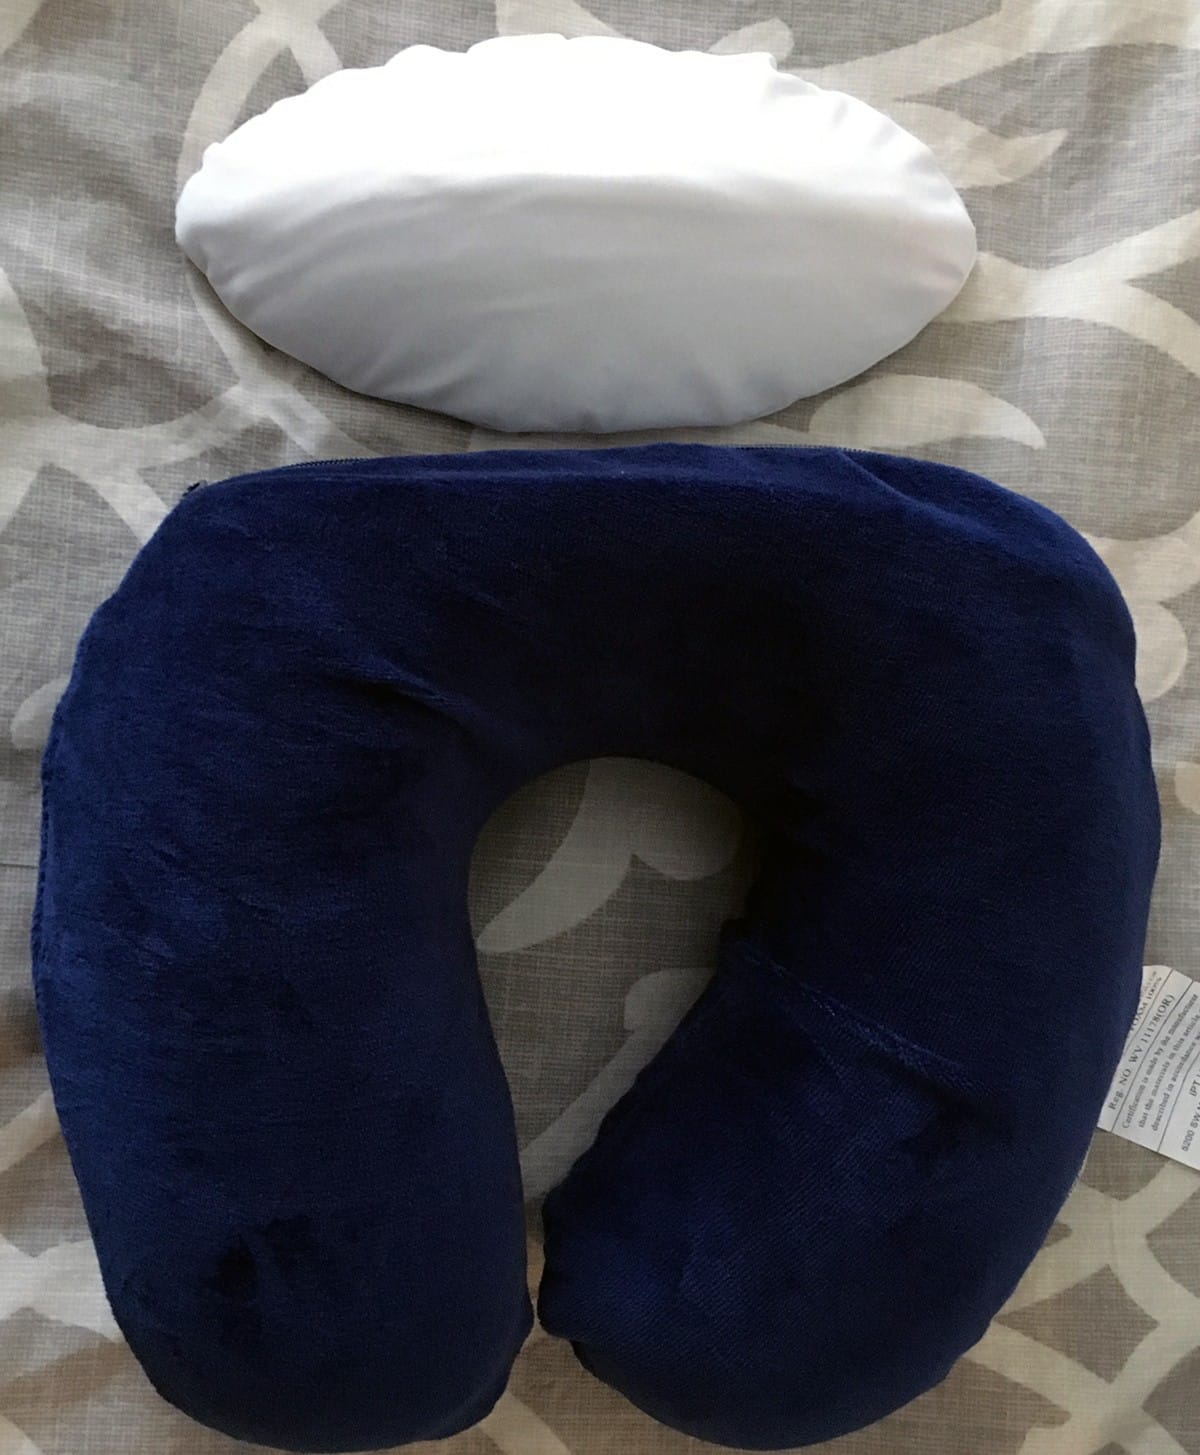 TravelMate Neck Support Travel Pillow